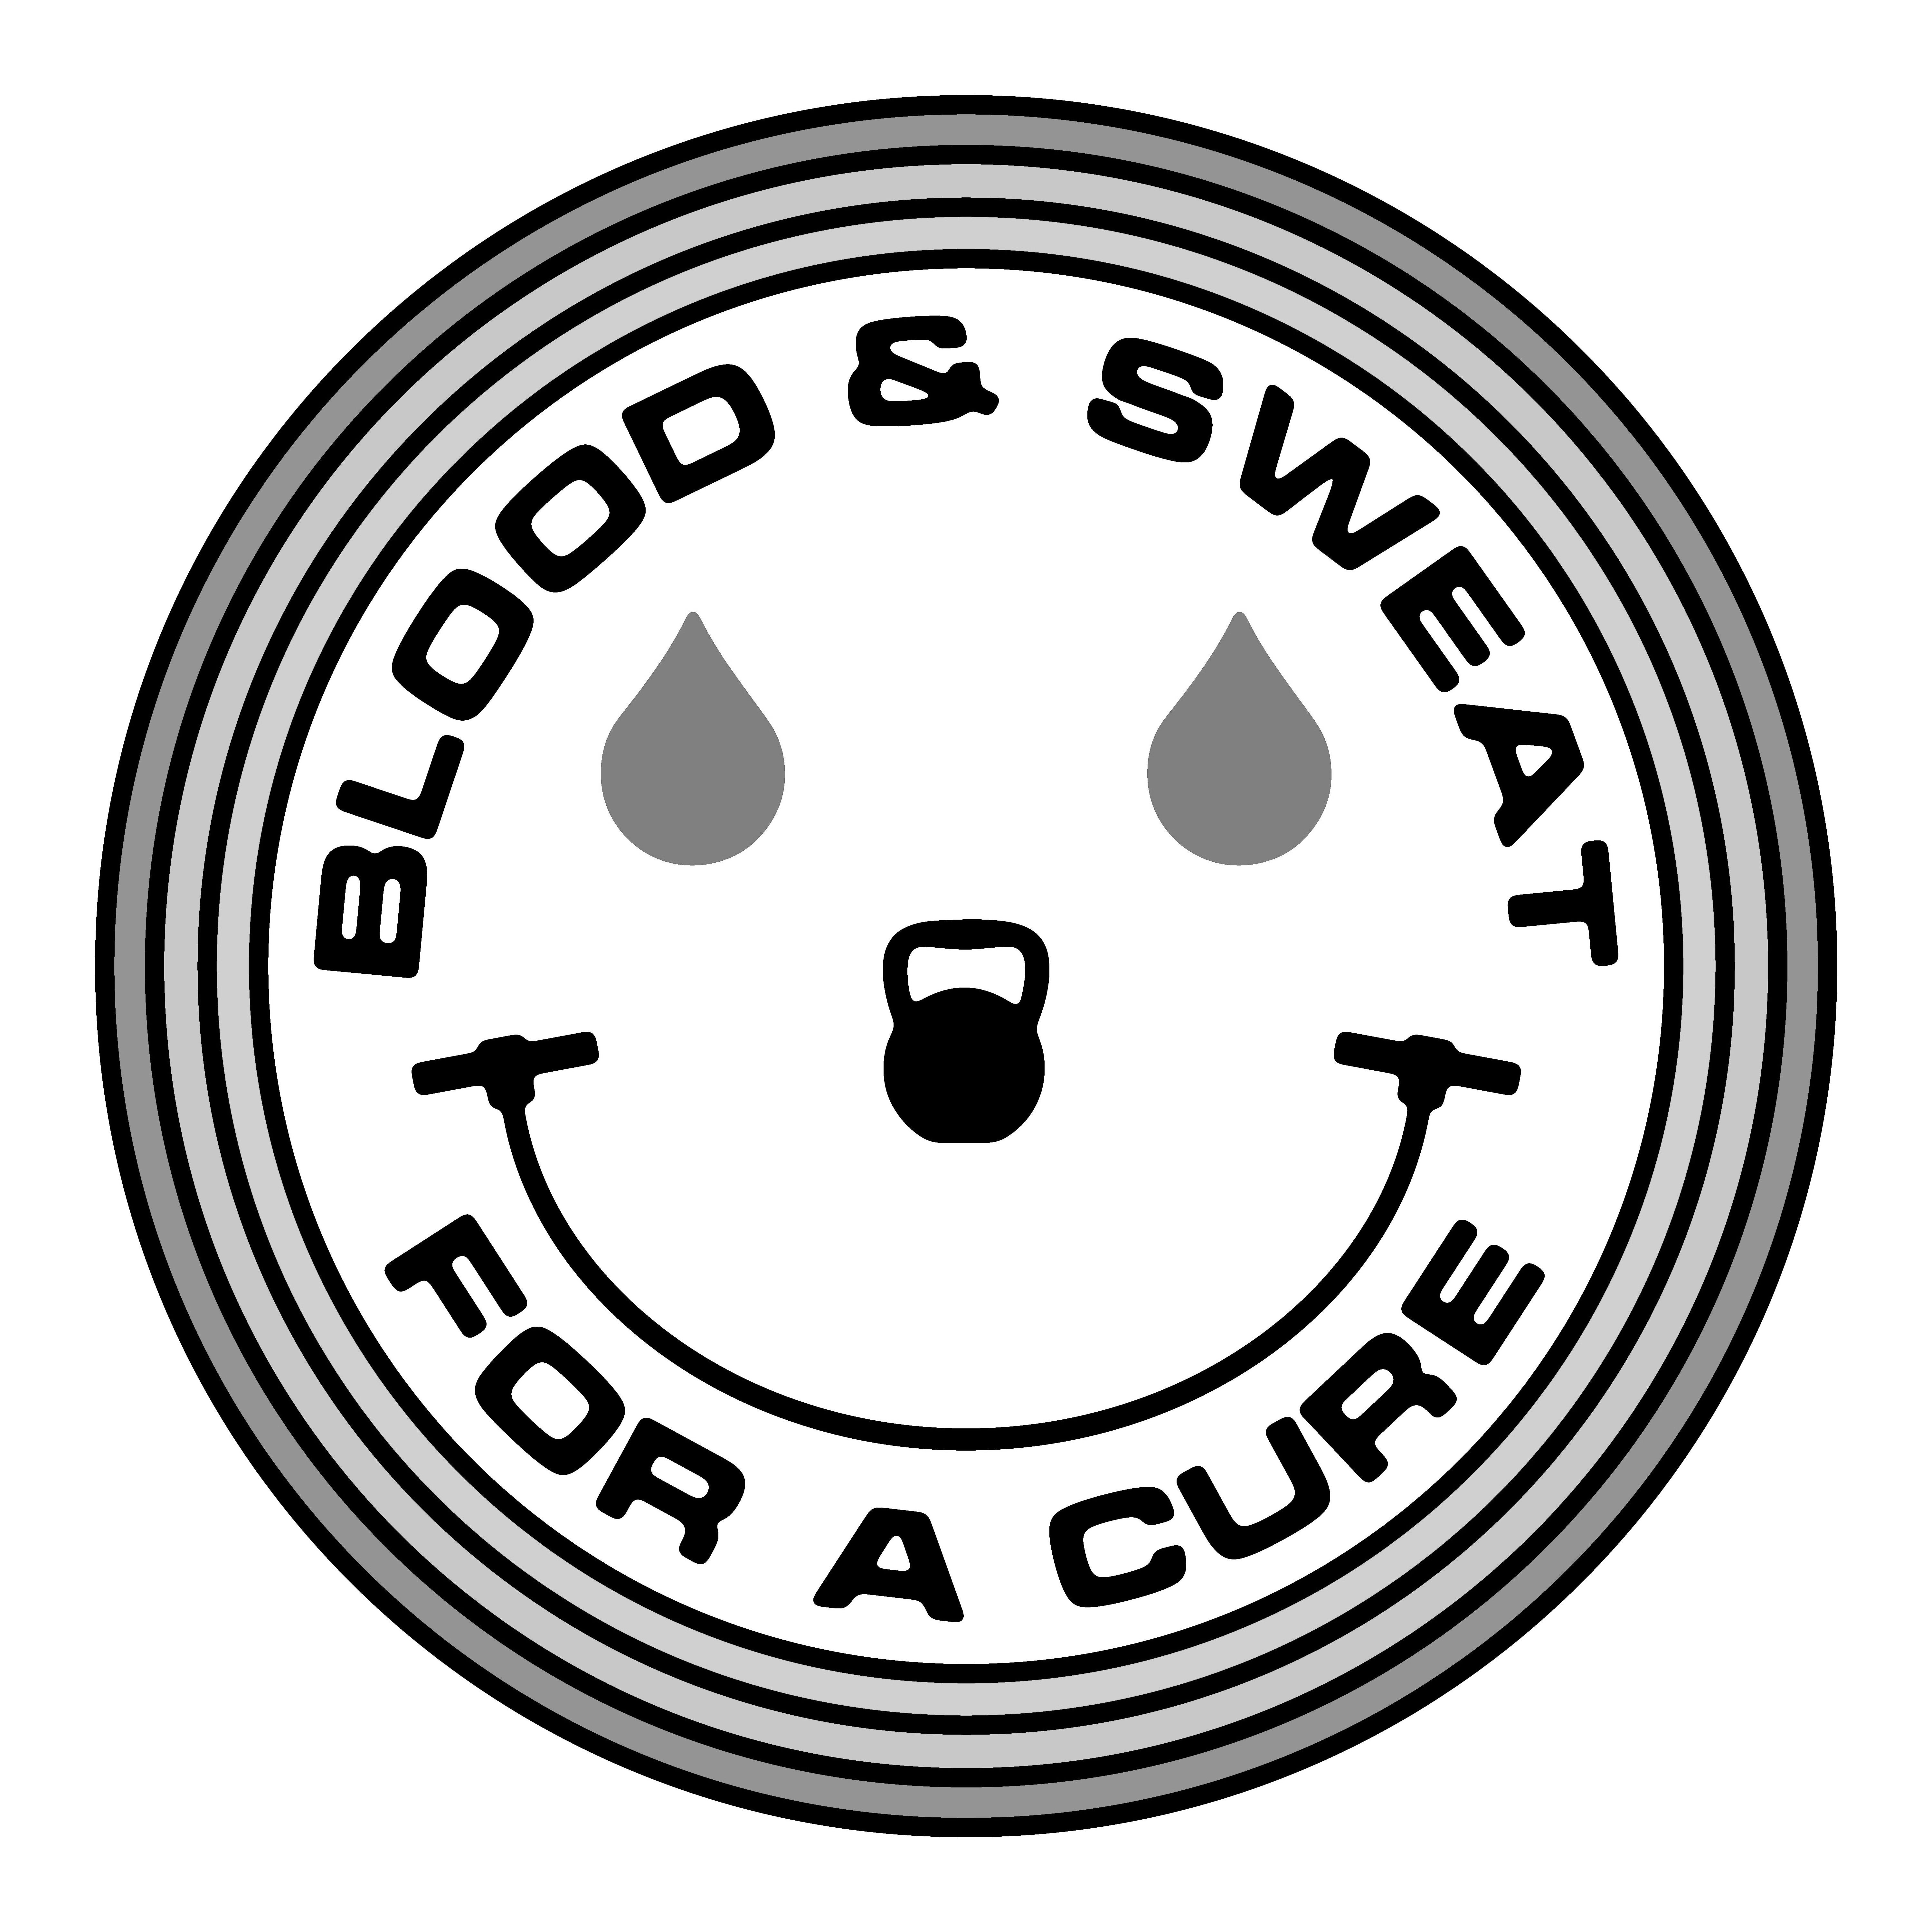 Trademark Logo BLOOD &amp; SWEAT FOR A CURE